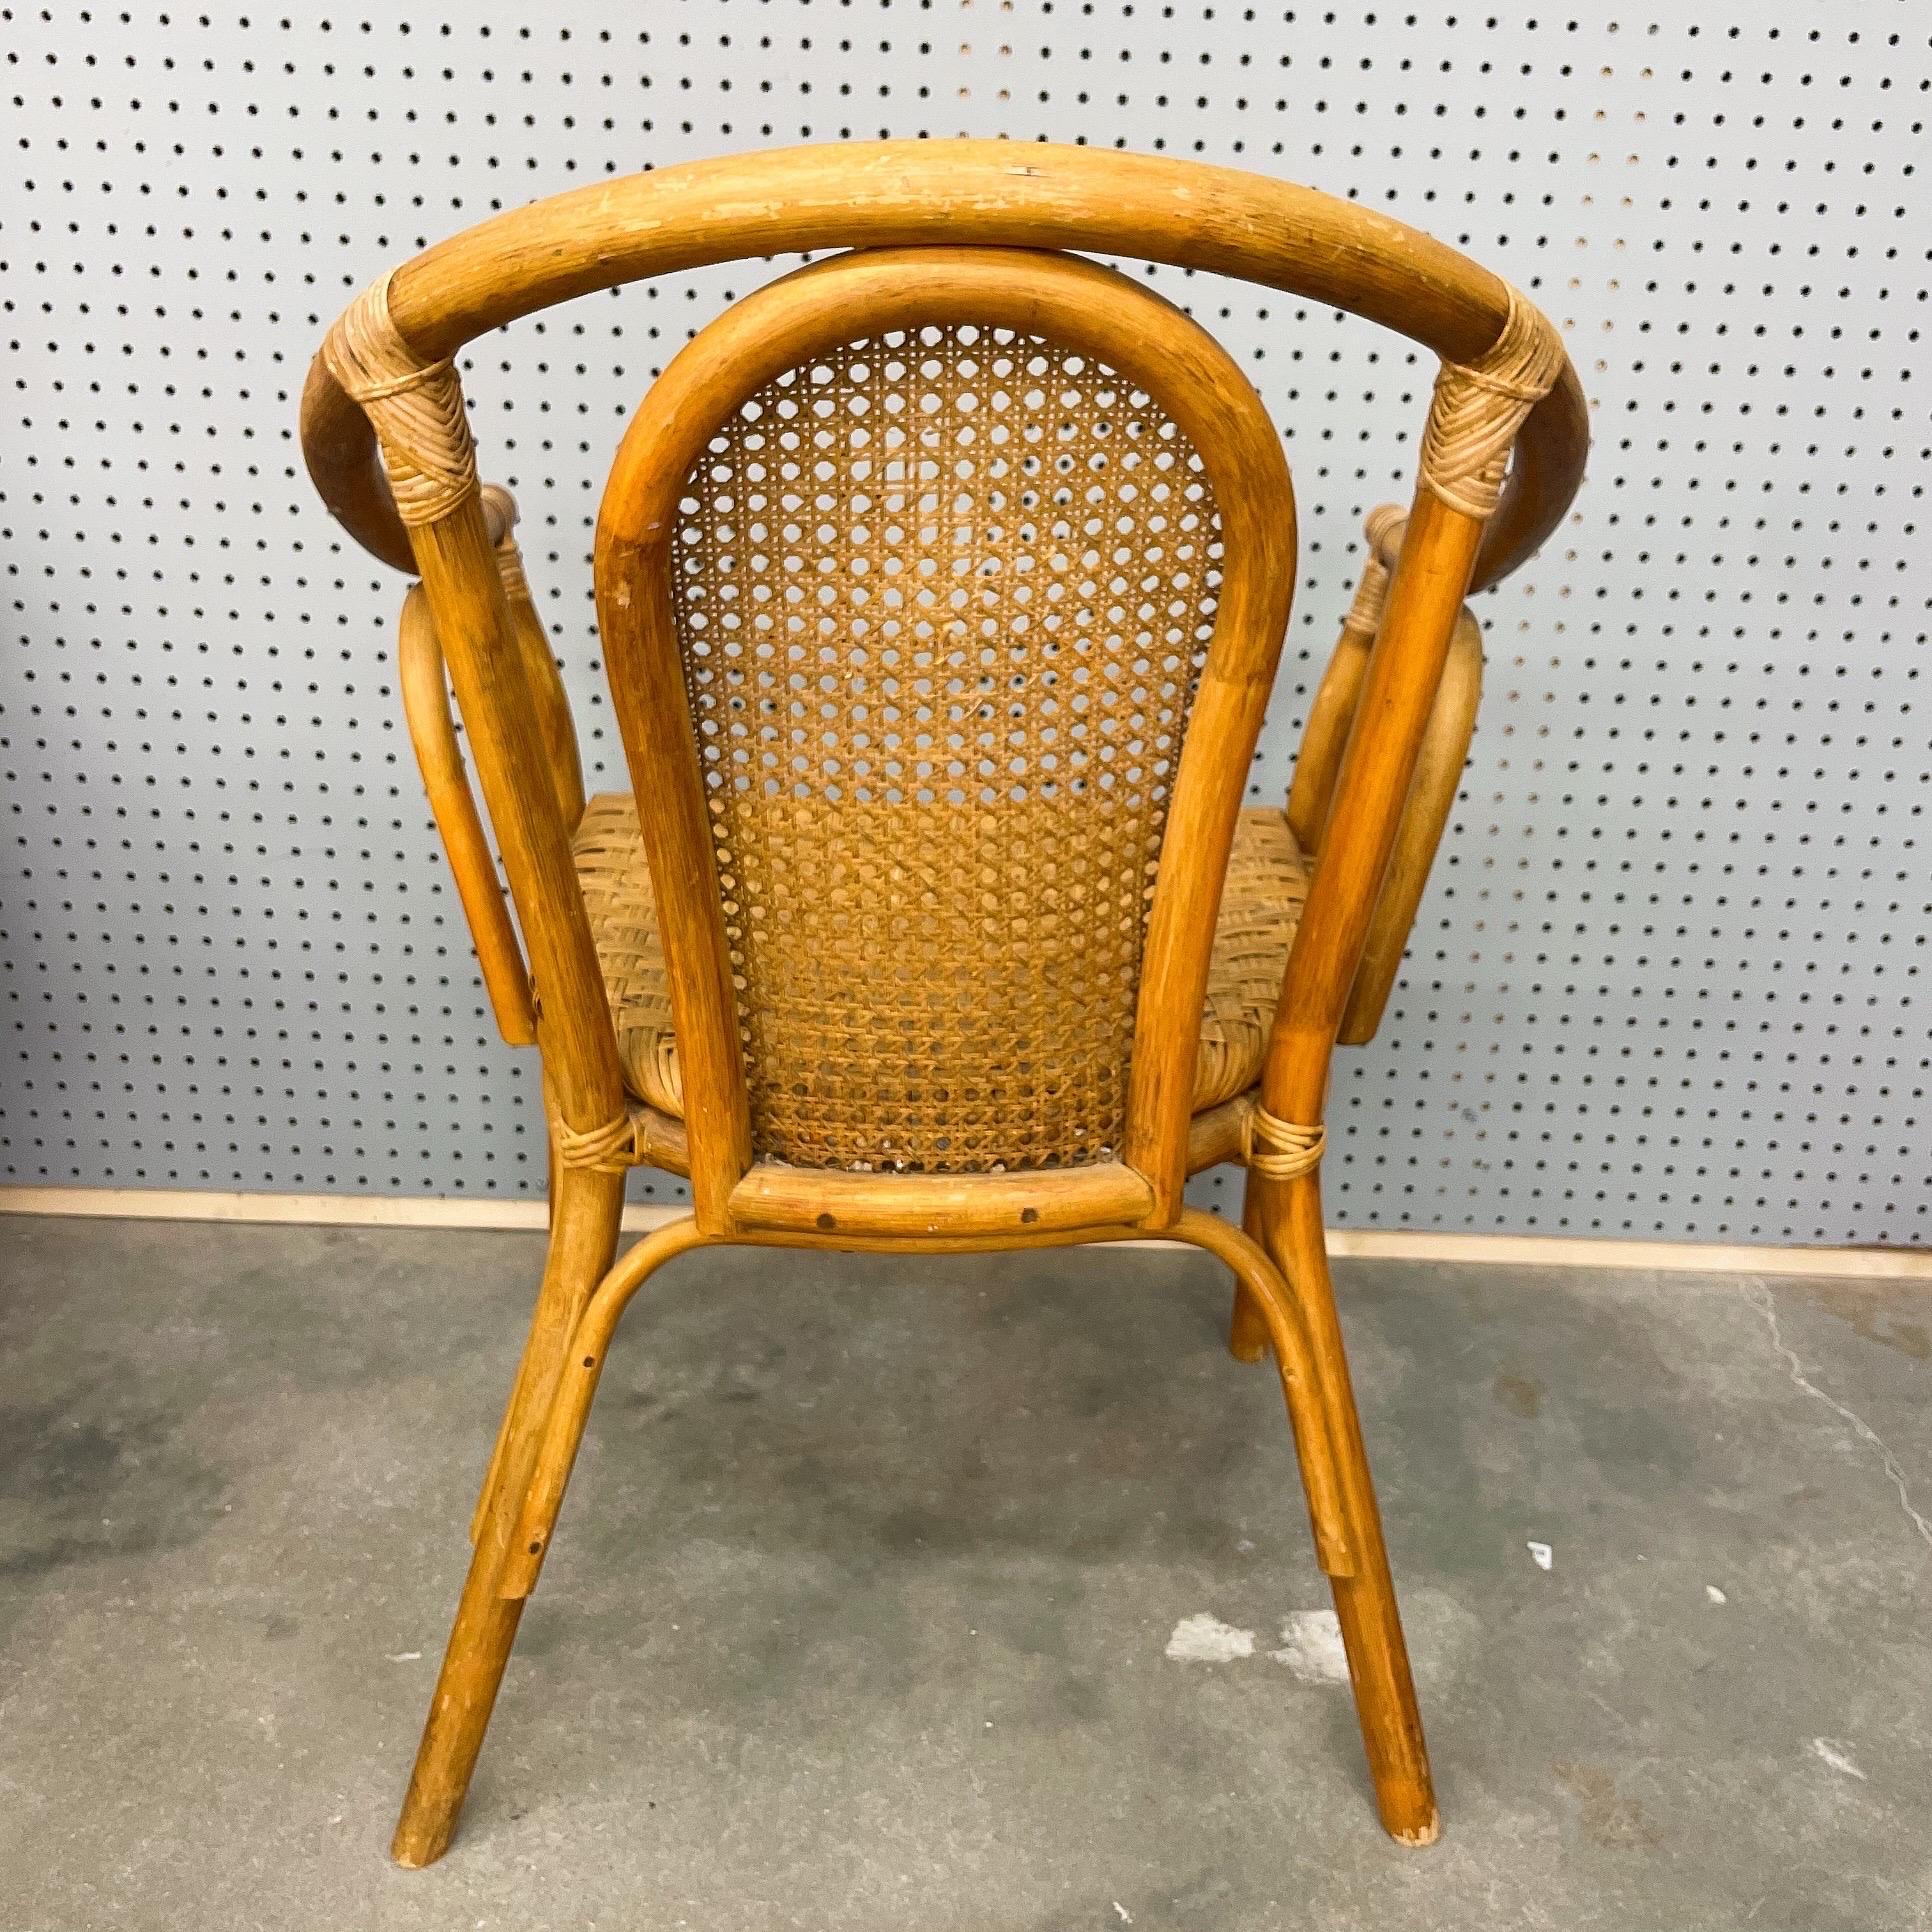 Mid 20th Century Bamboo Rattan Dining Chairs With Cane Inset Back - Set of 4 For Sale 1